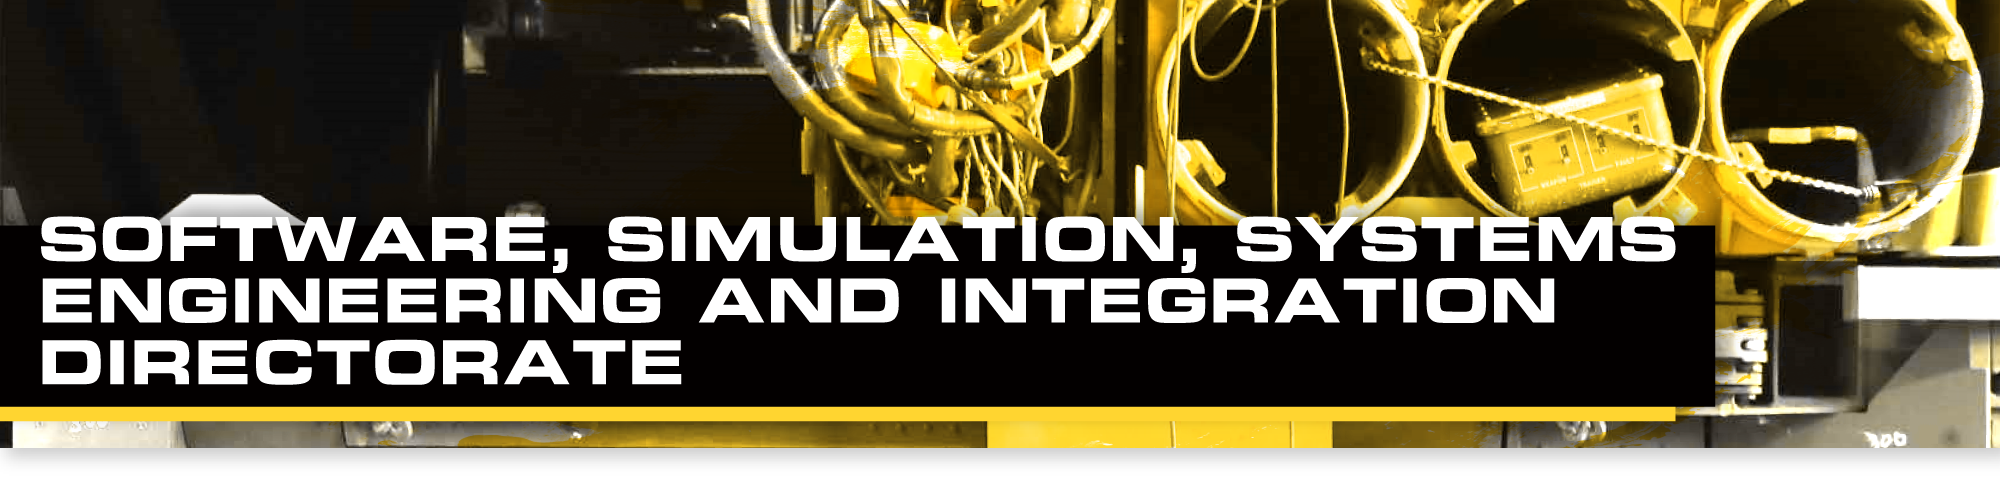 Software, Simulation, Systems Engineering, and Integration Directorate